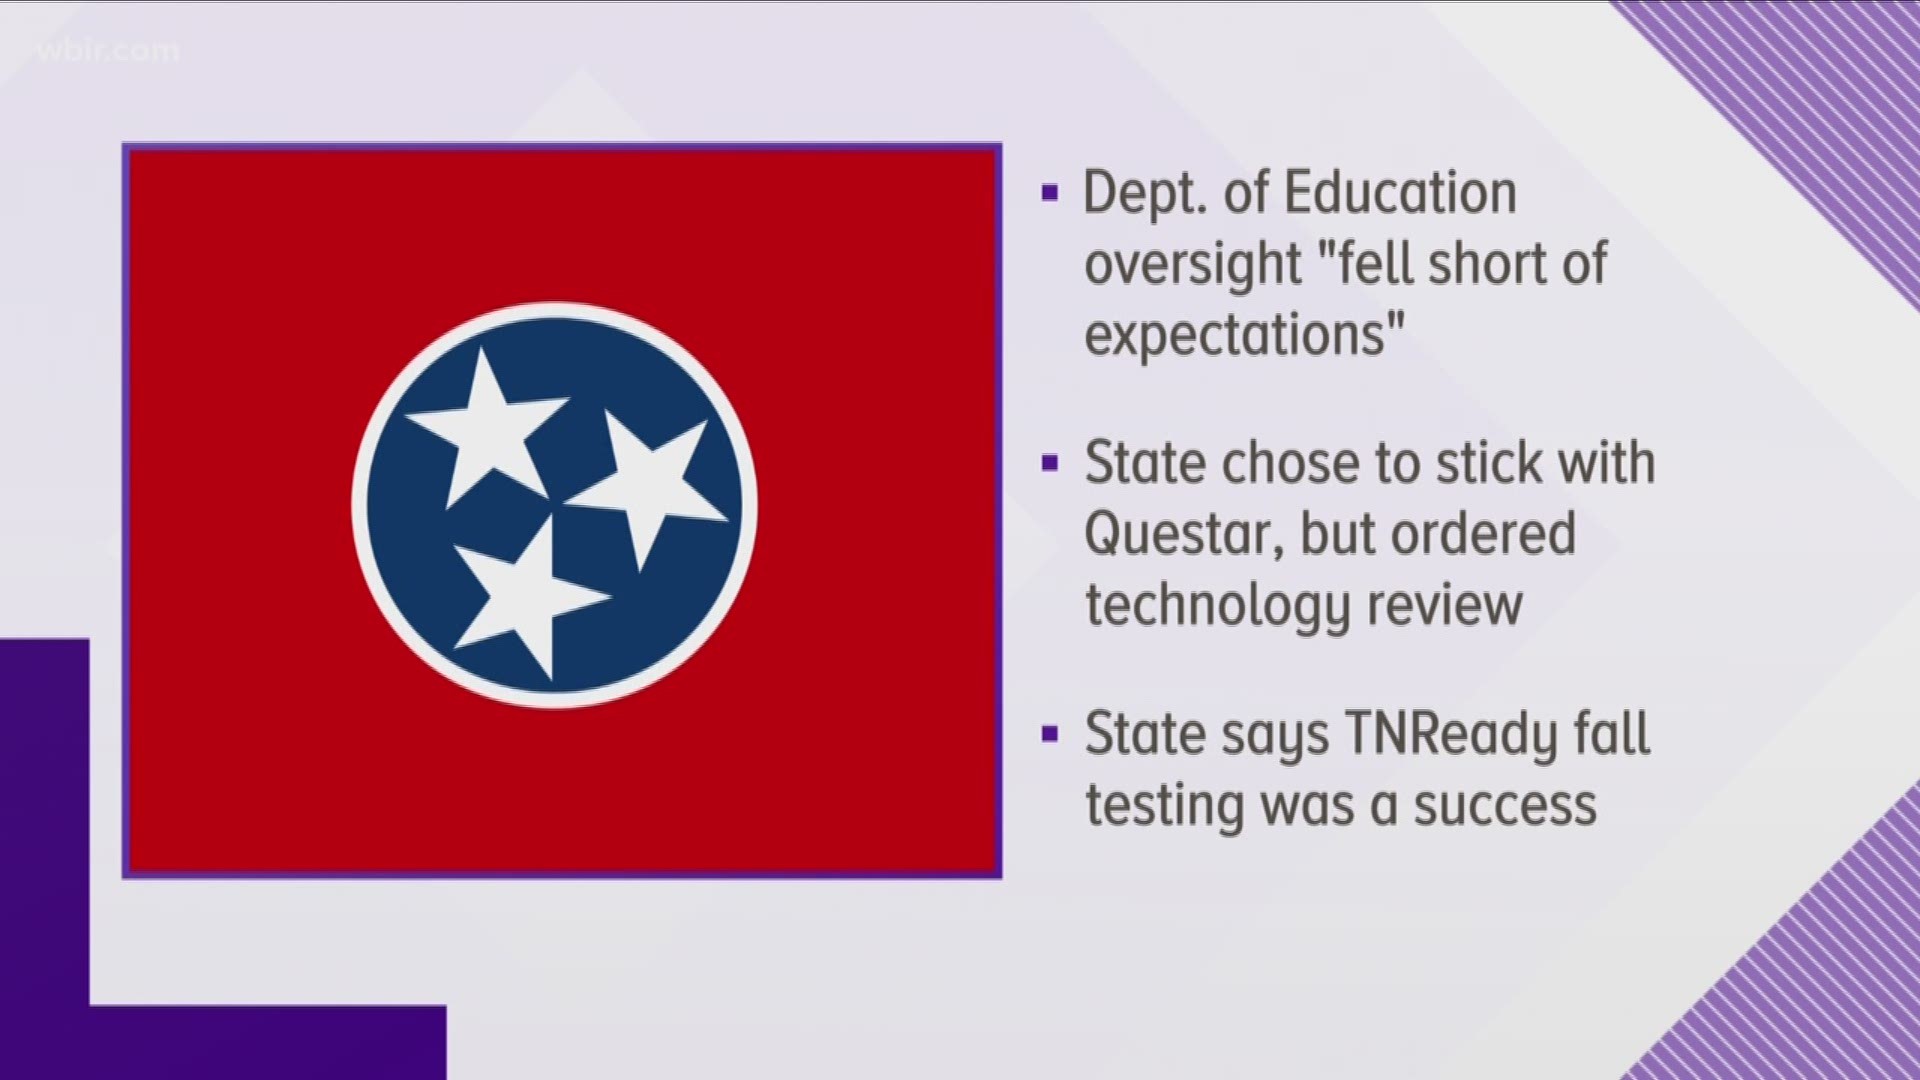 A new report says log-in delays...slow servers...and software bugs all contributed to problems with TNReady testing last spring.